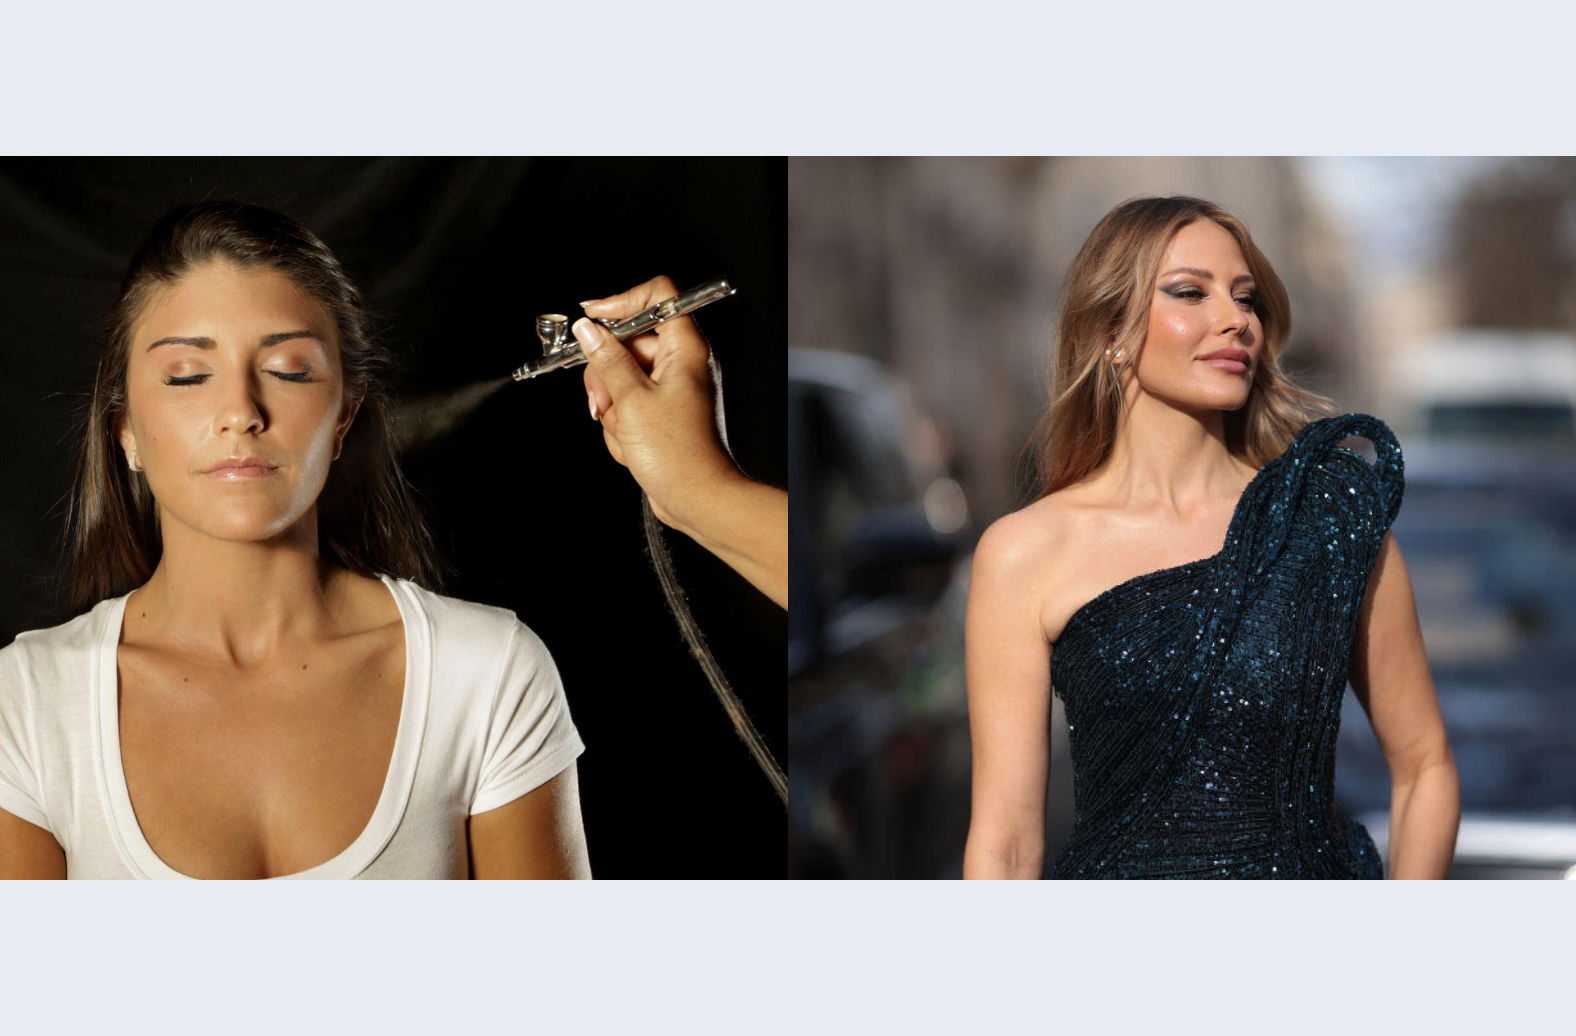 Airbrush Makeup Vs. HD Makeup: Their Benefits and How to Apply